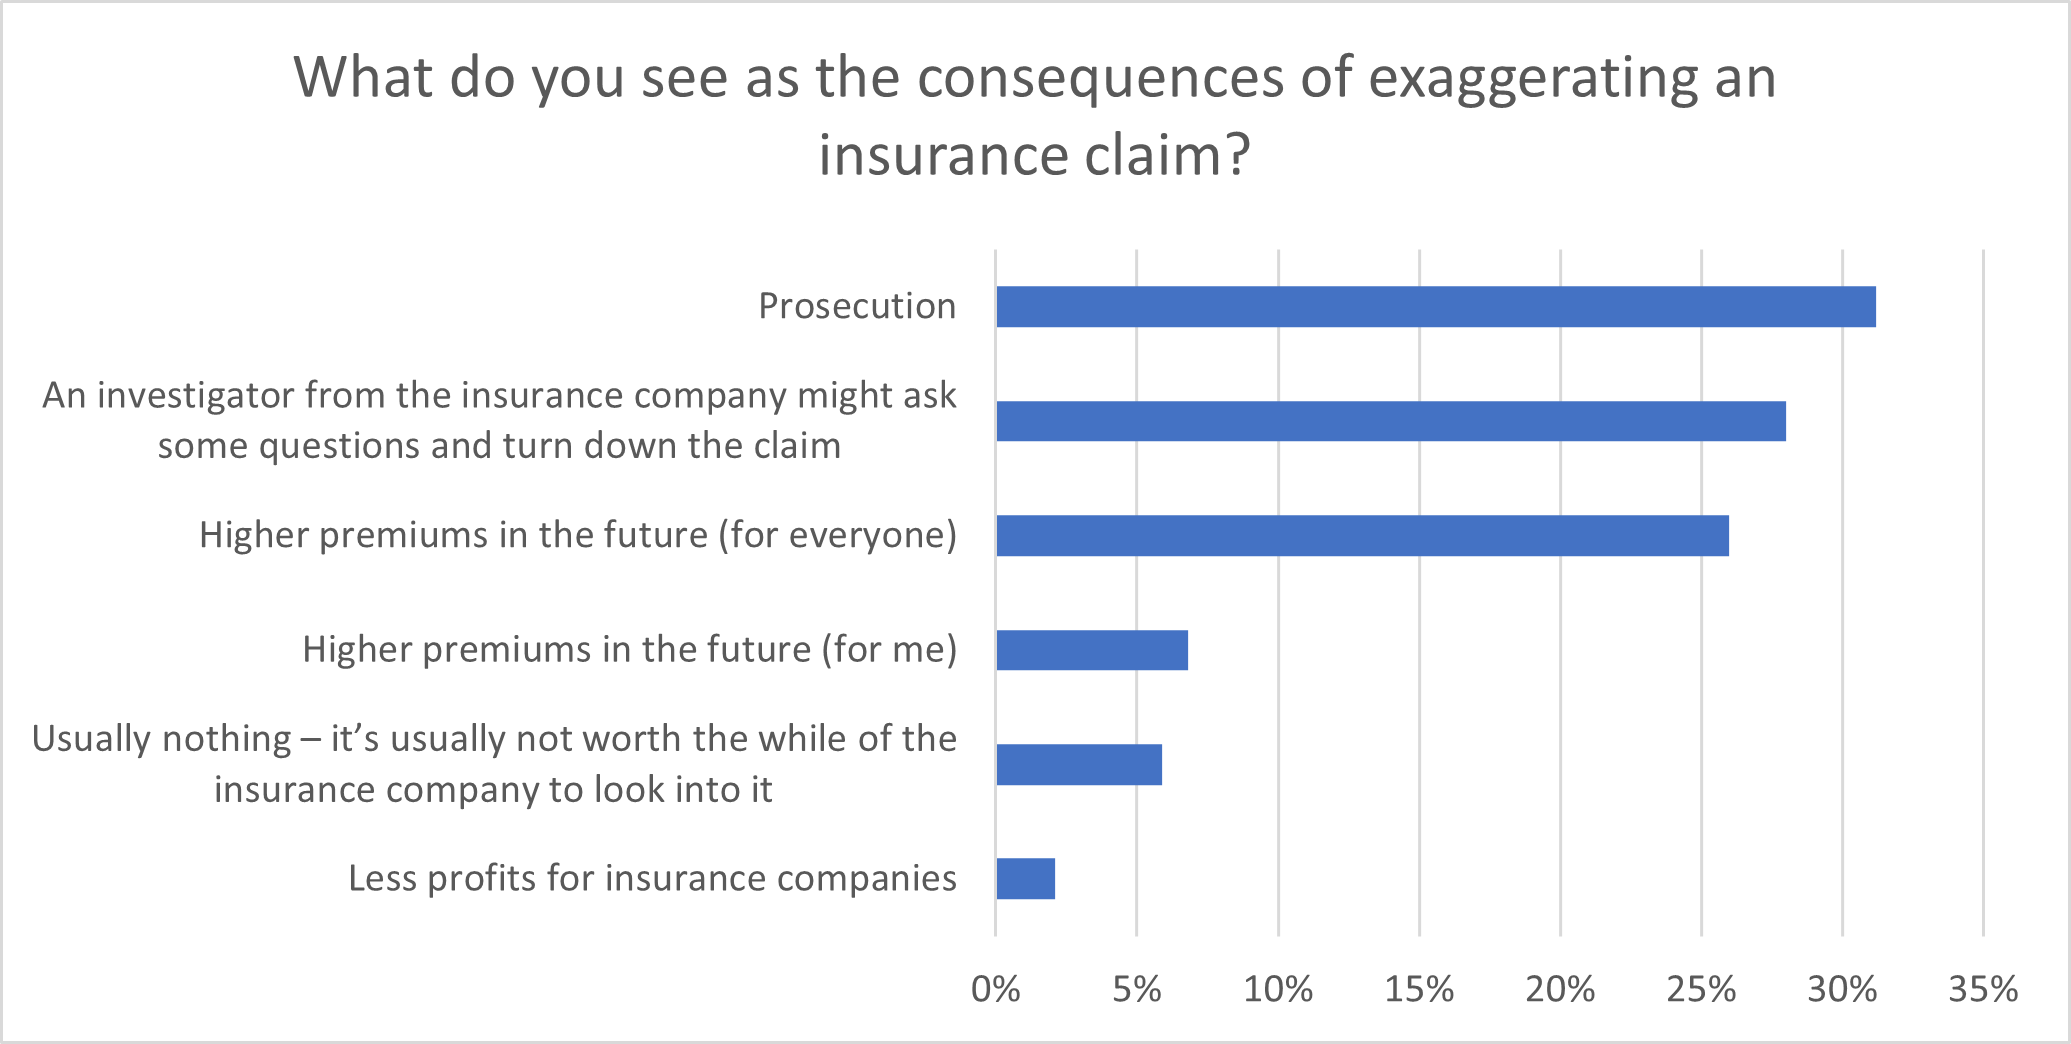 What do you see as the consequences of exaggerating an insurance claim